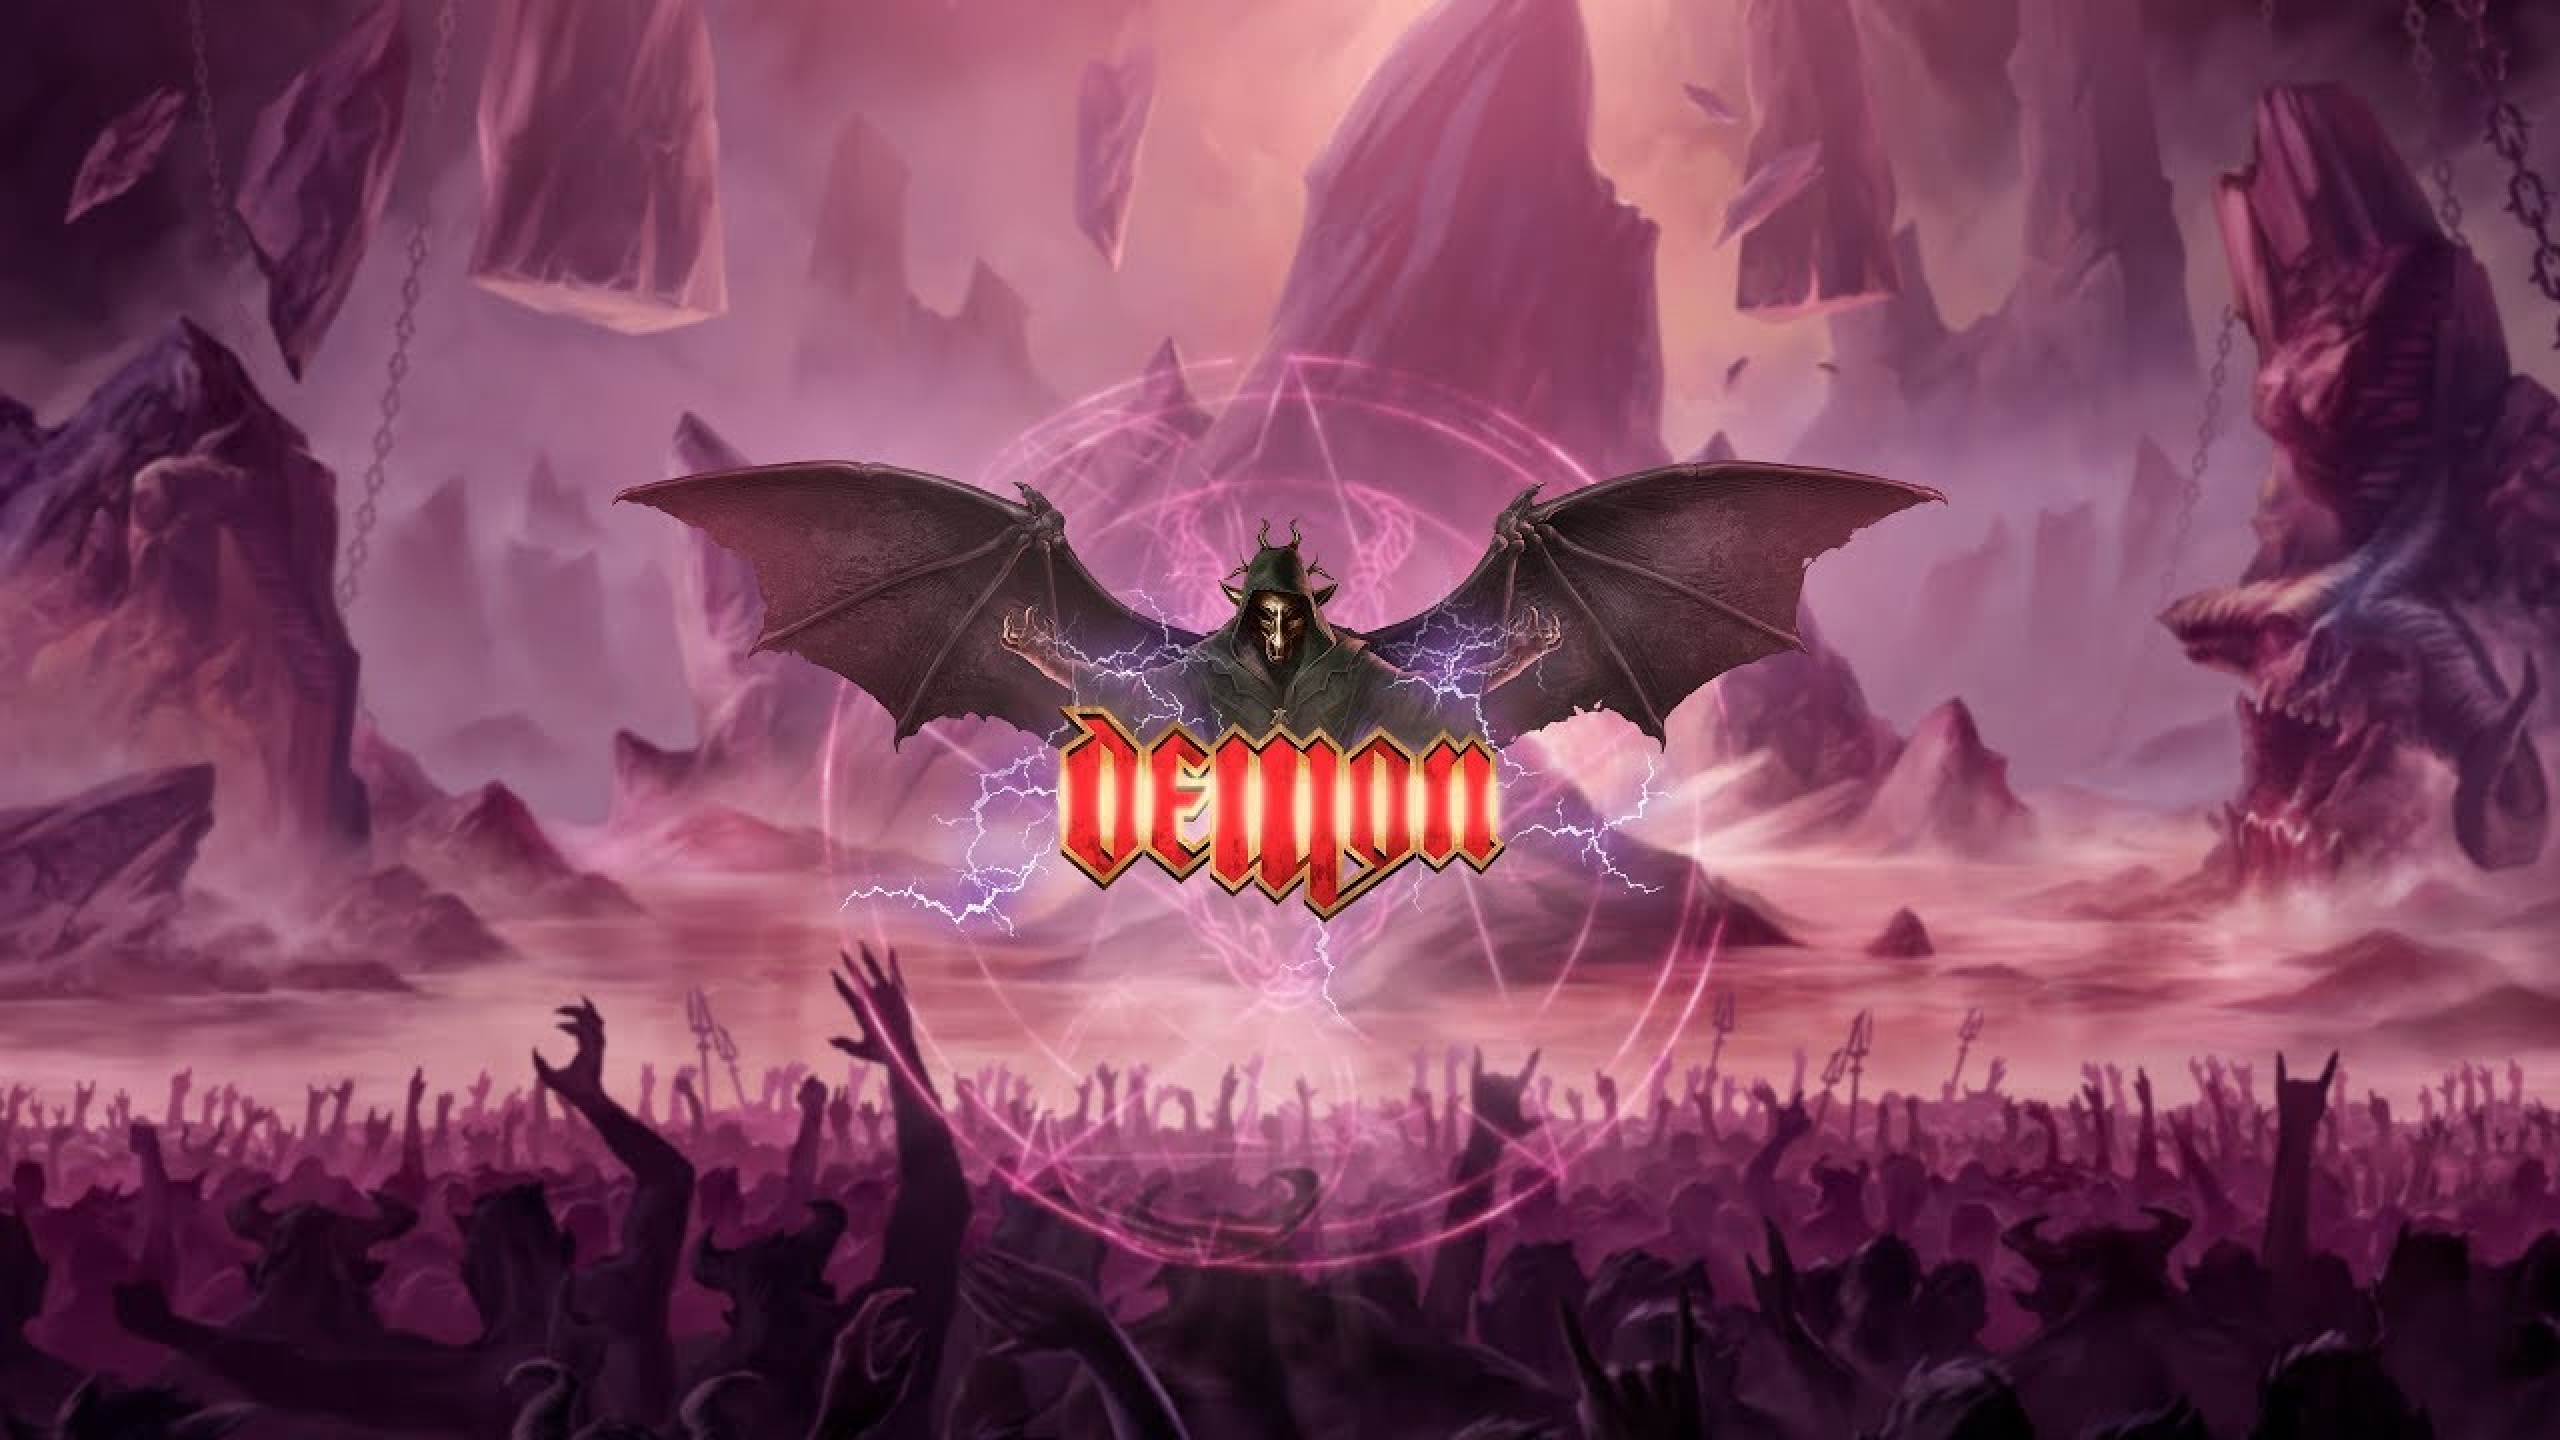 The Demon Online Slot Demo Game by Playn GO